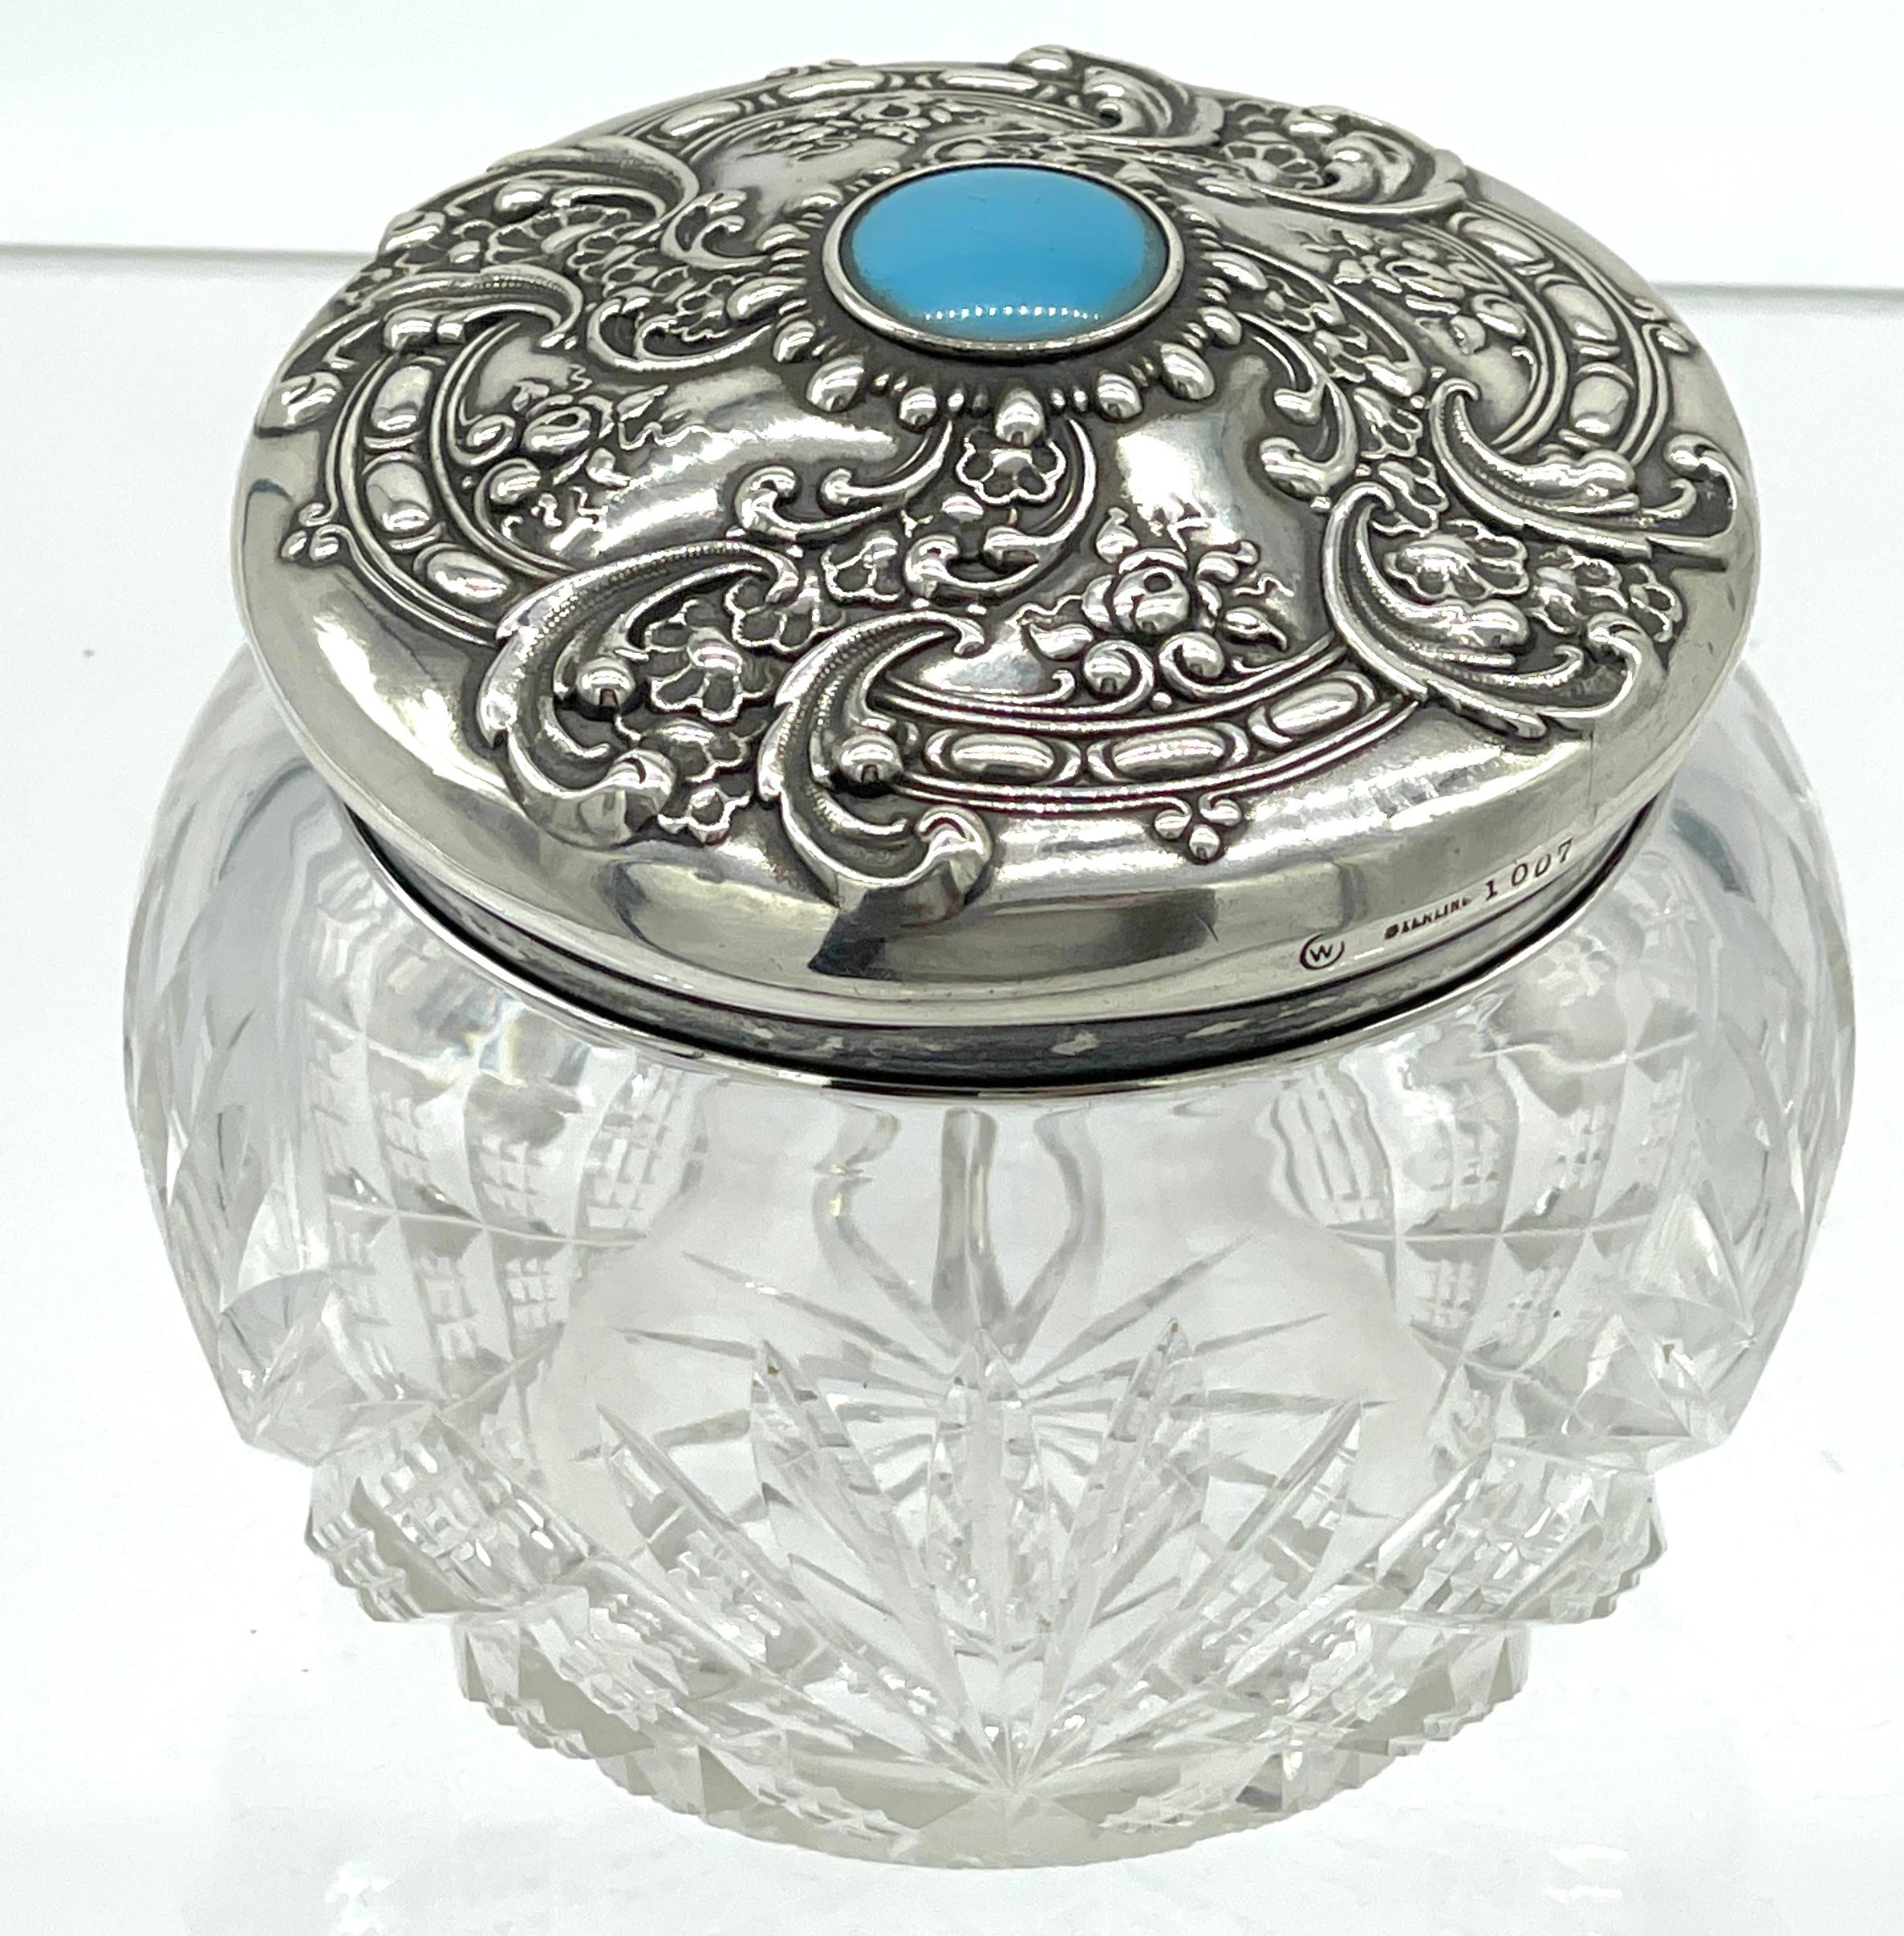 American Brilliant Cut Glass, Sterling & Turquoise Dresser Jar, by Whiting 
USA, circa 1900s, by Frank M. Whiting Silver Company 

A beautiful American Brilliant Cut Glass Sterling Dresser Jar, crafted by the esteemed Frank M. Whiting Silver Company